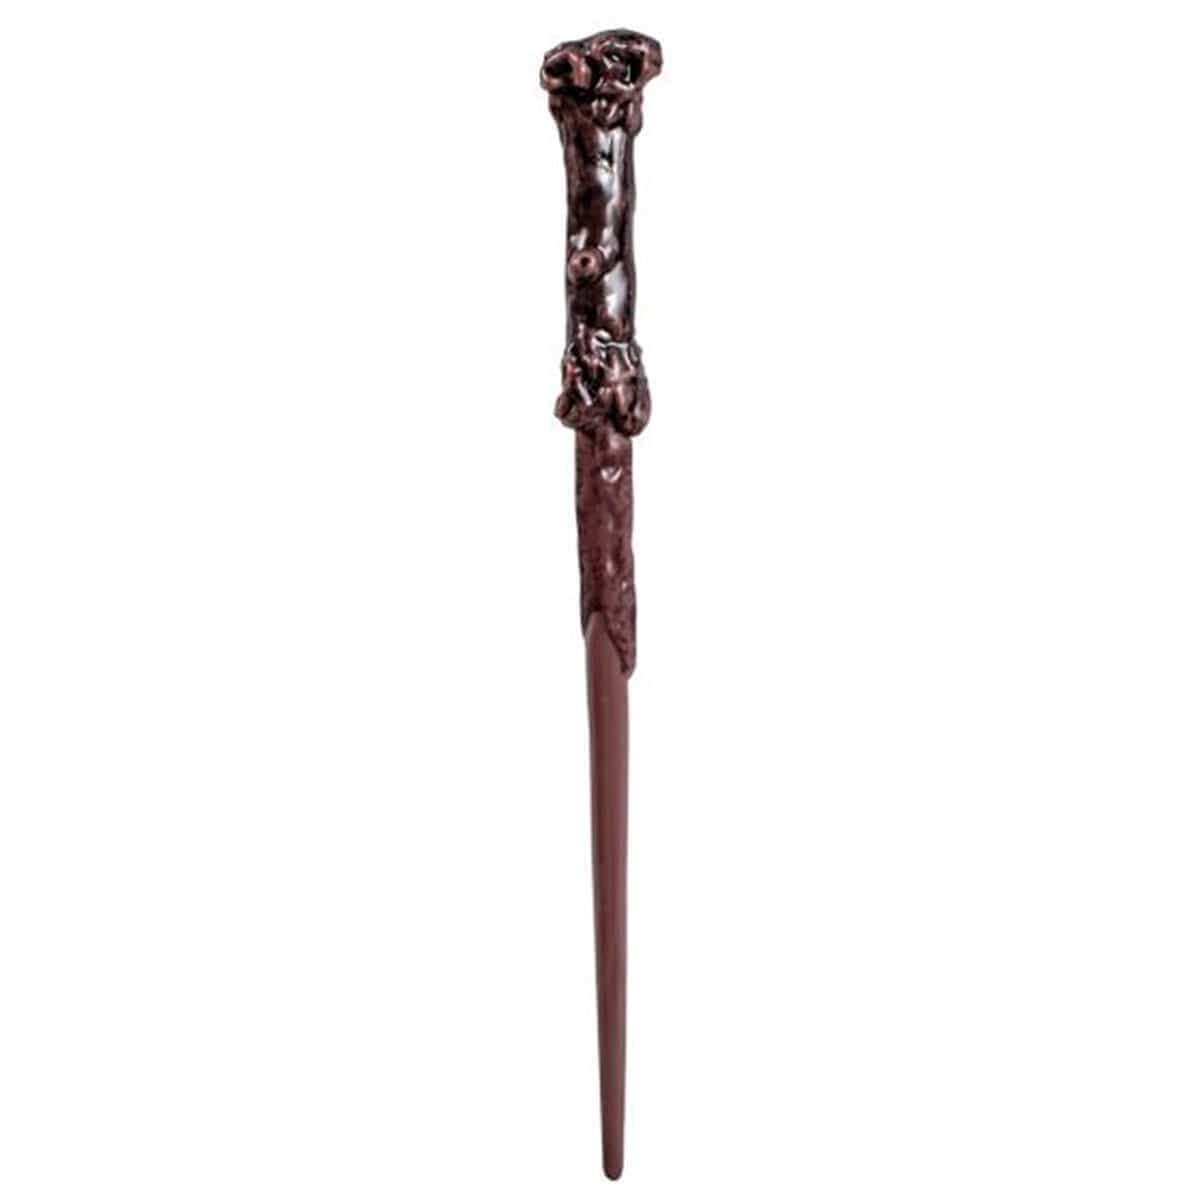 Buy Costume Accessories Harry Potter Wand sold at Party Expert